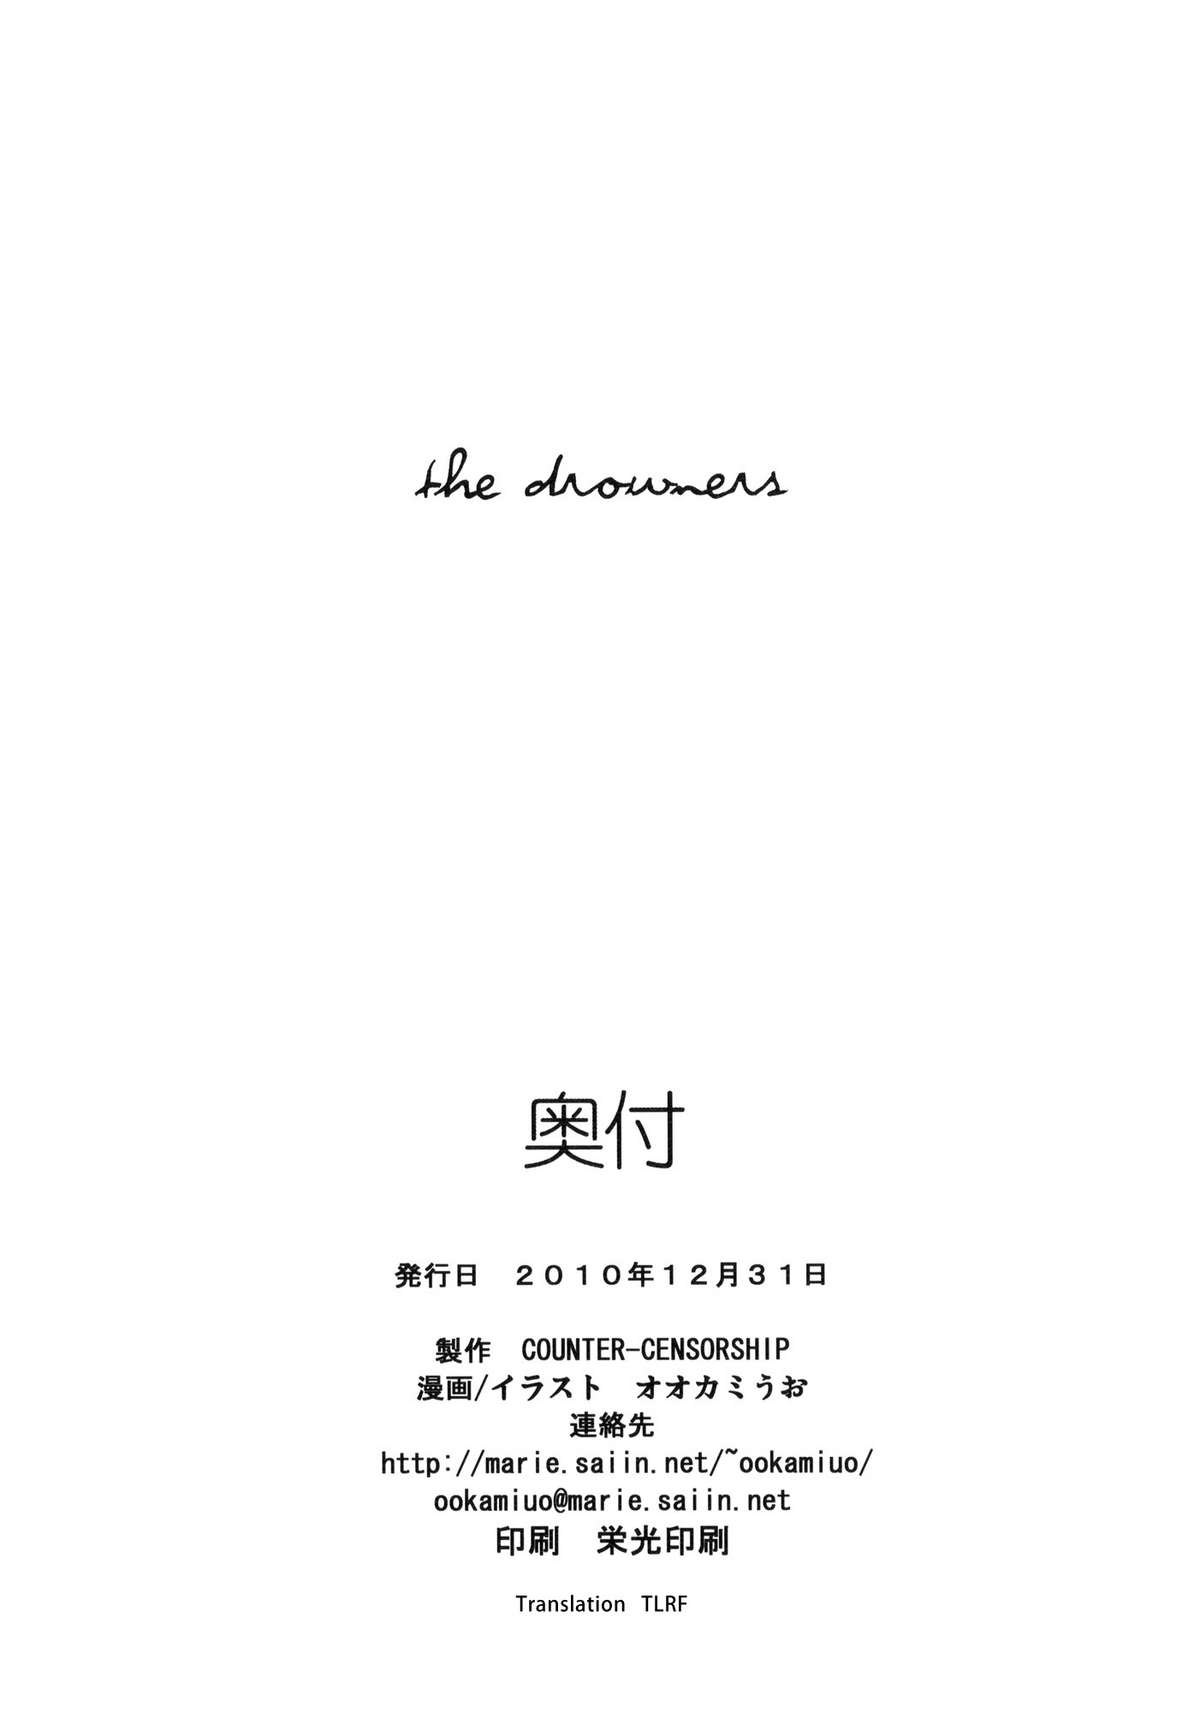 (C79) [COUNTER-CENSORSHIP (オオカミうお)] the drowners [英訳]